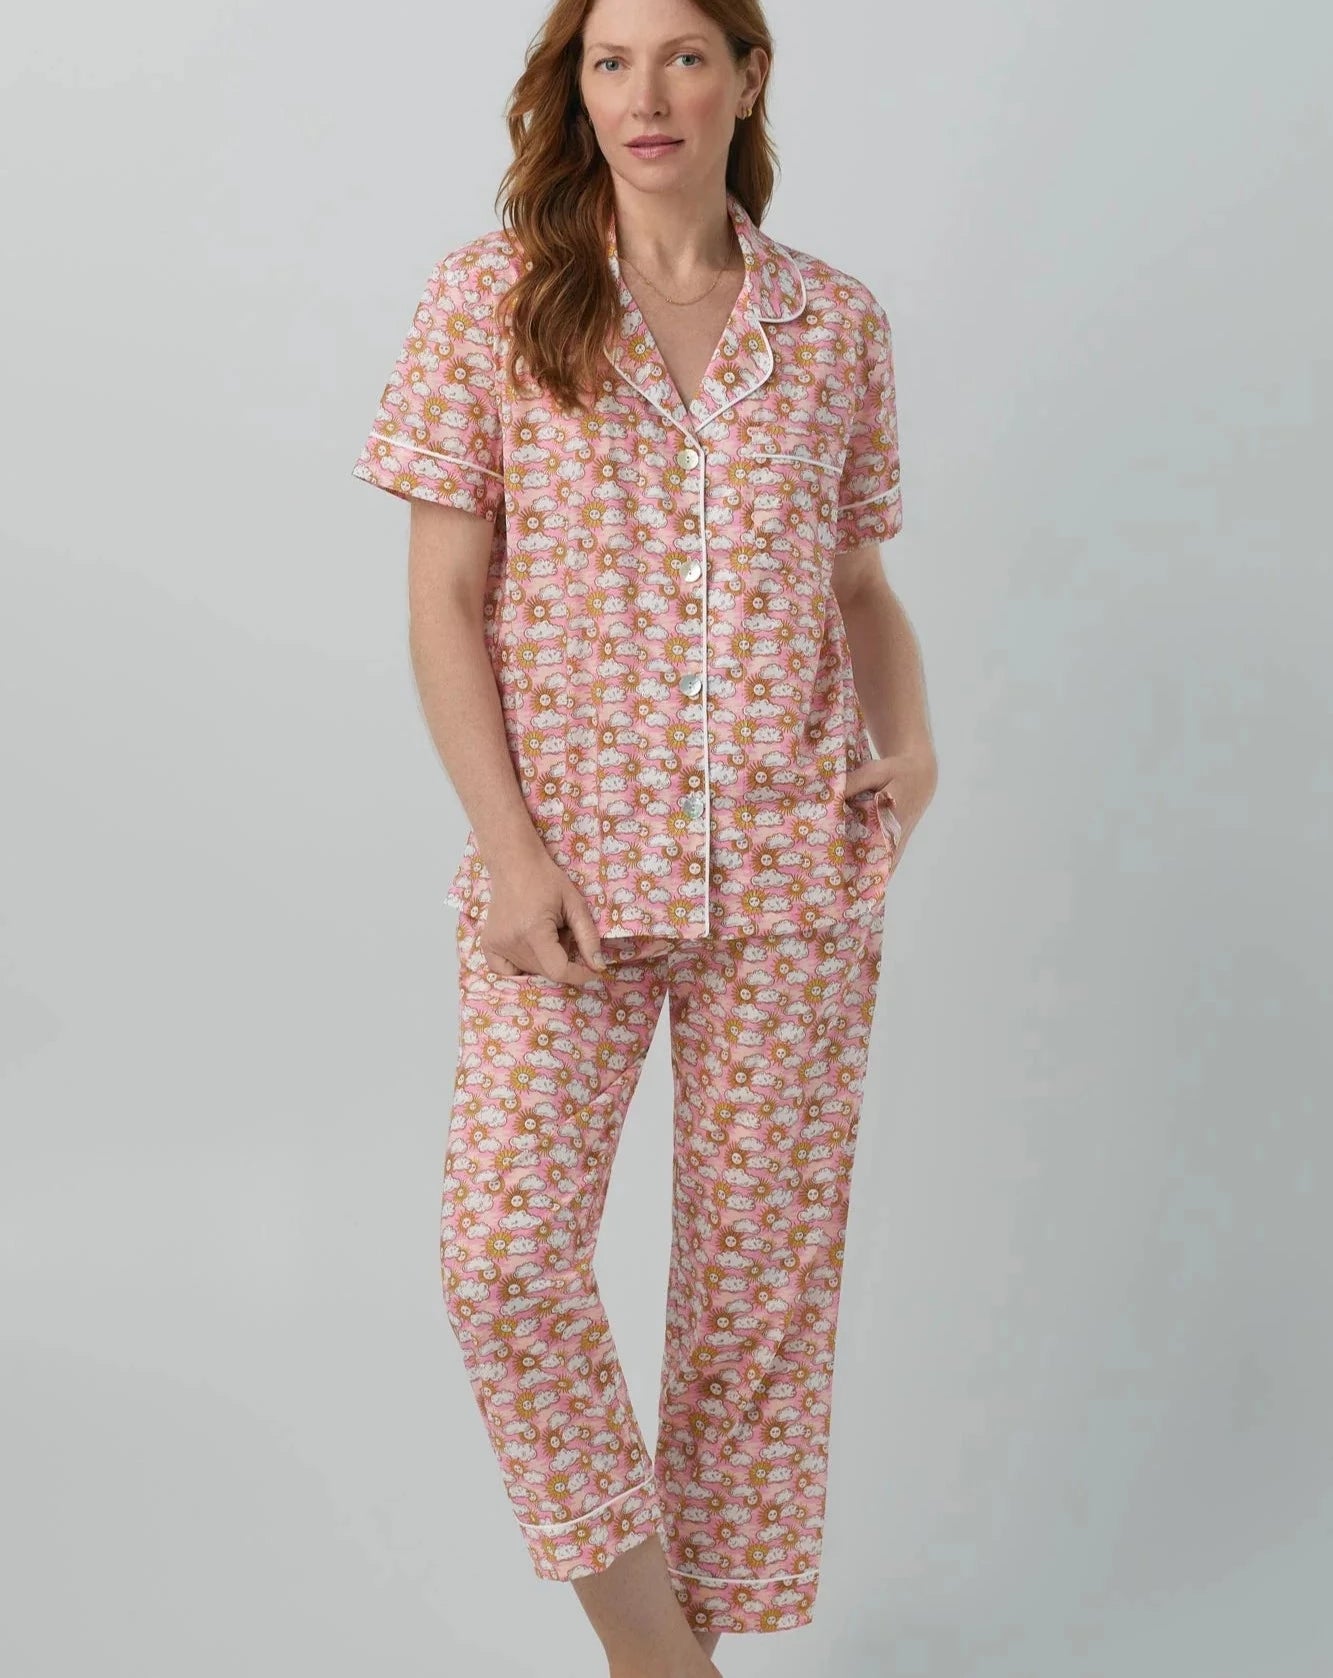 Follow The Sun Cropped Cotton PJ Set Made With Liberty Fabric